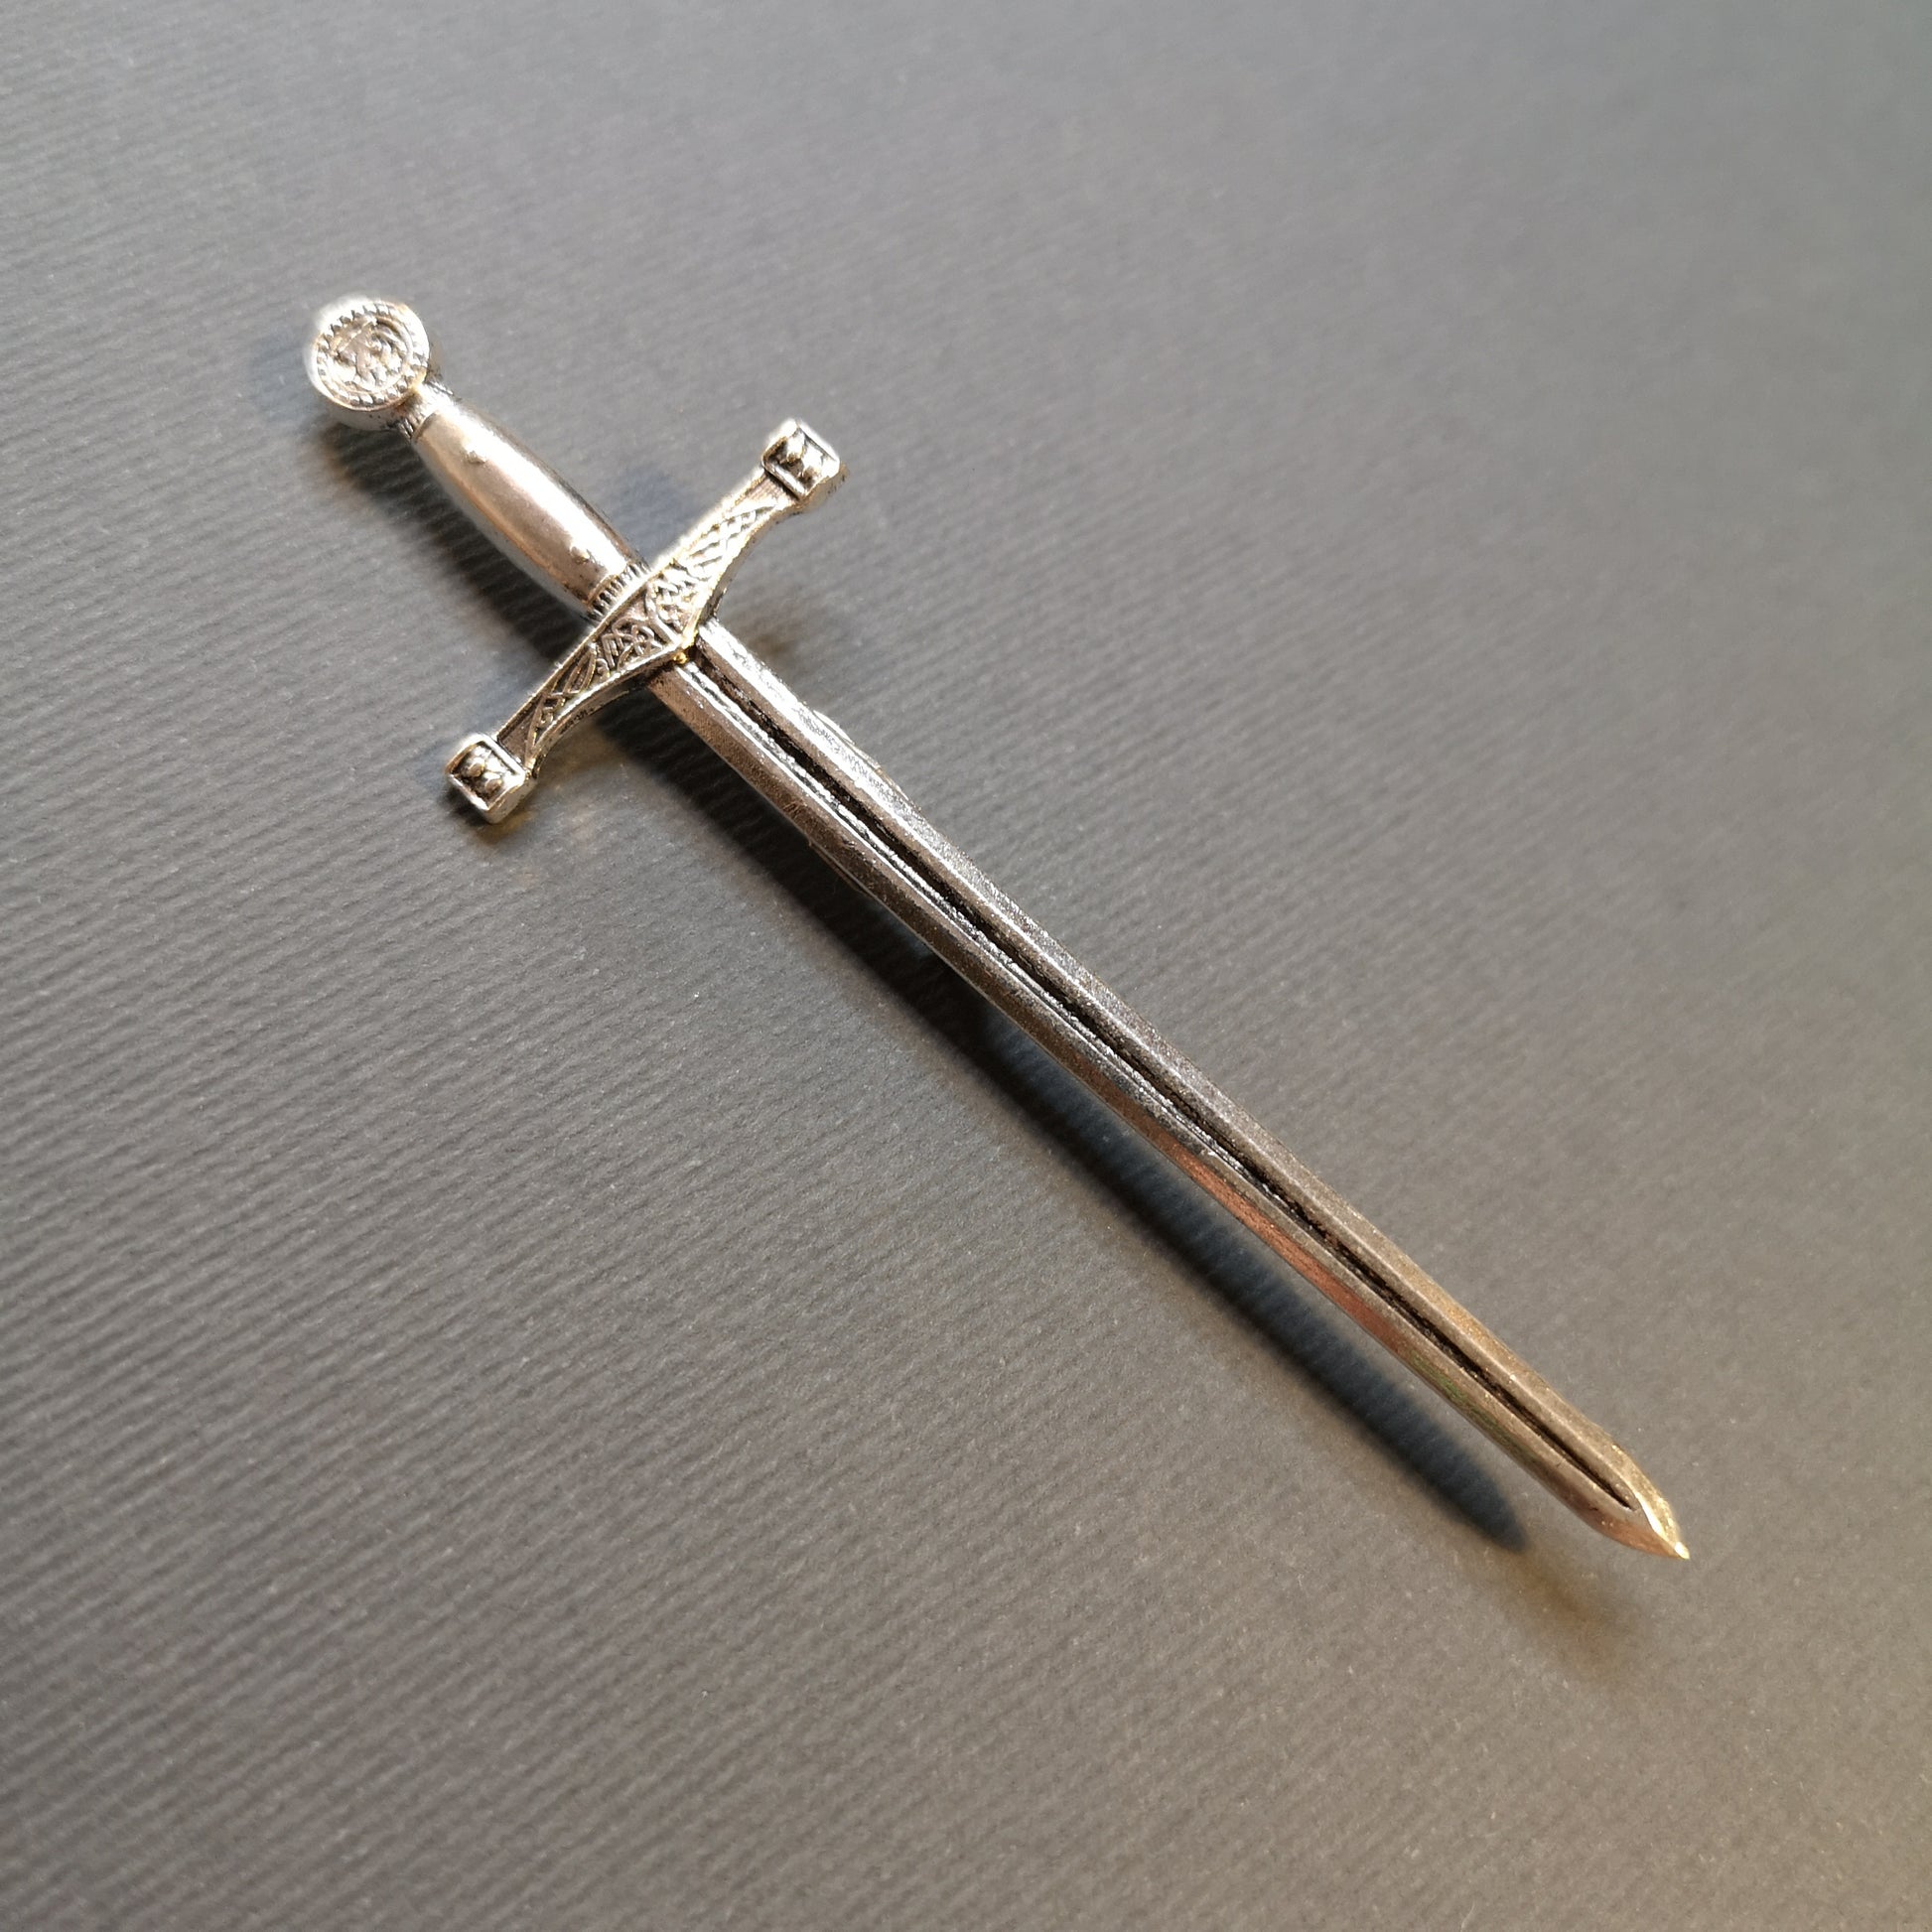 Excalibur sword brooch - The French Witch shop